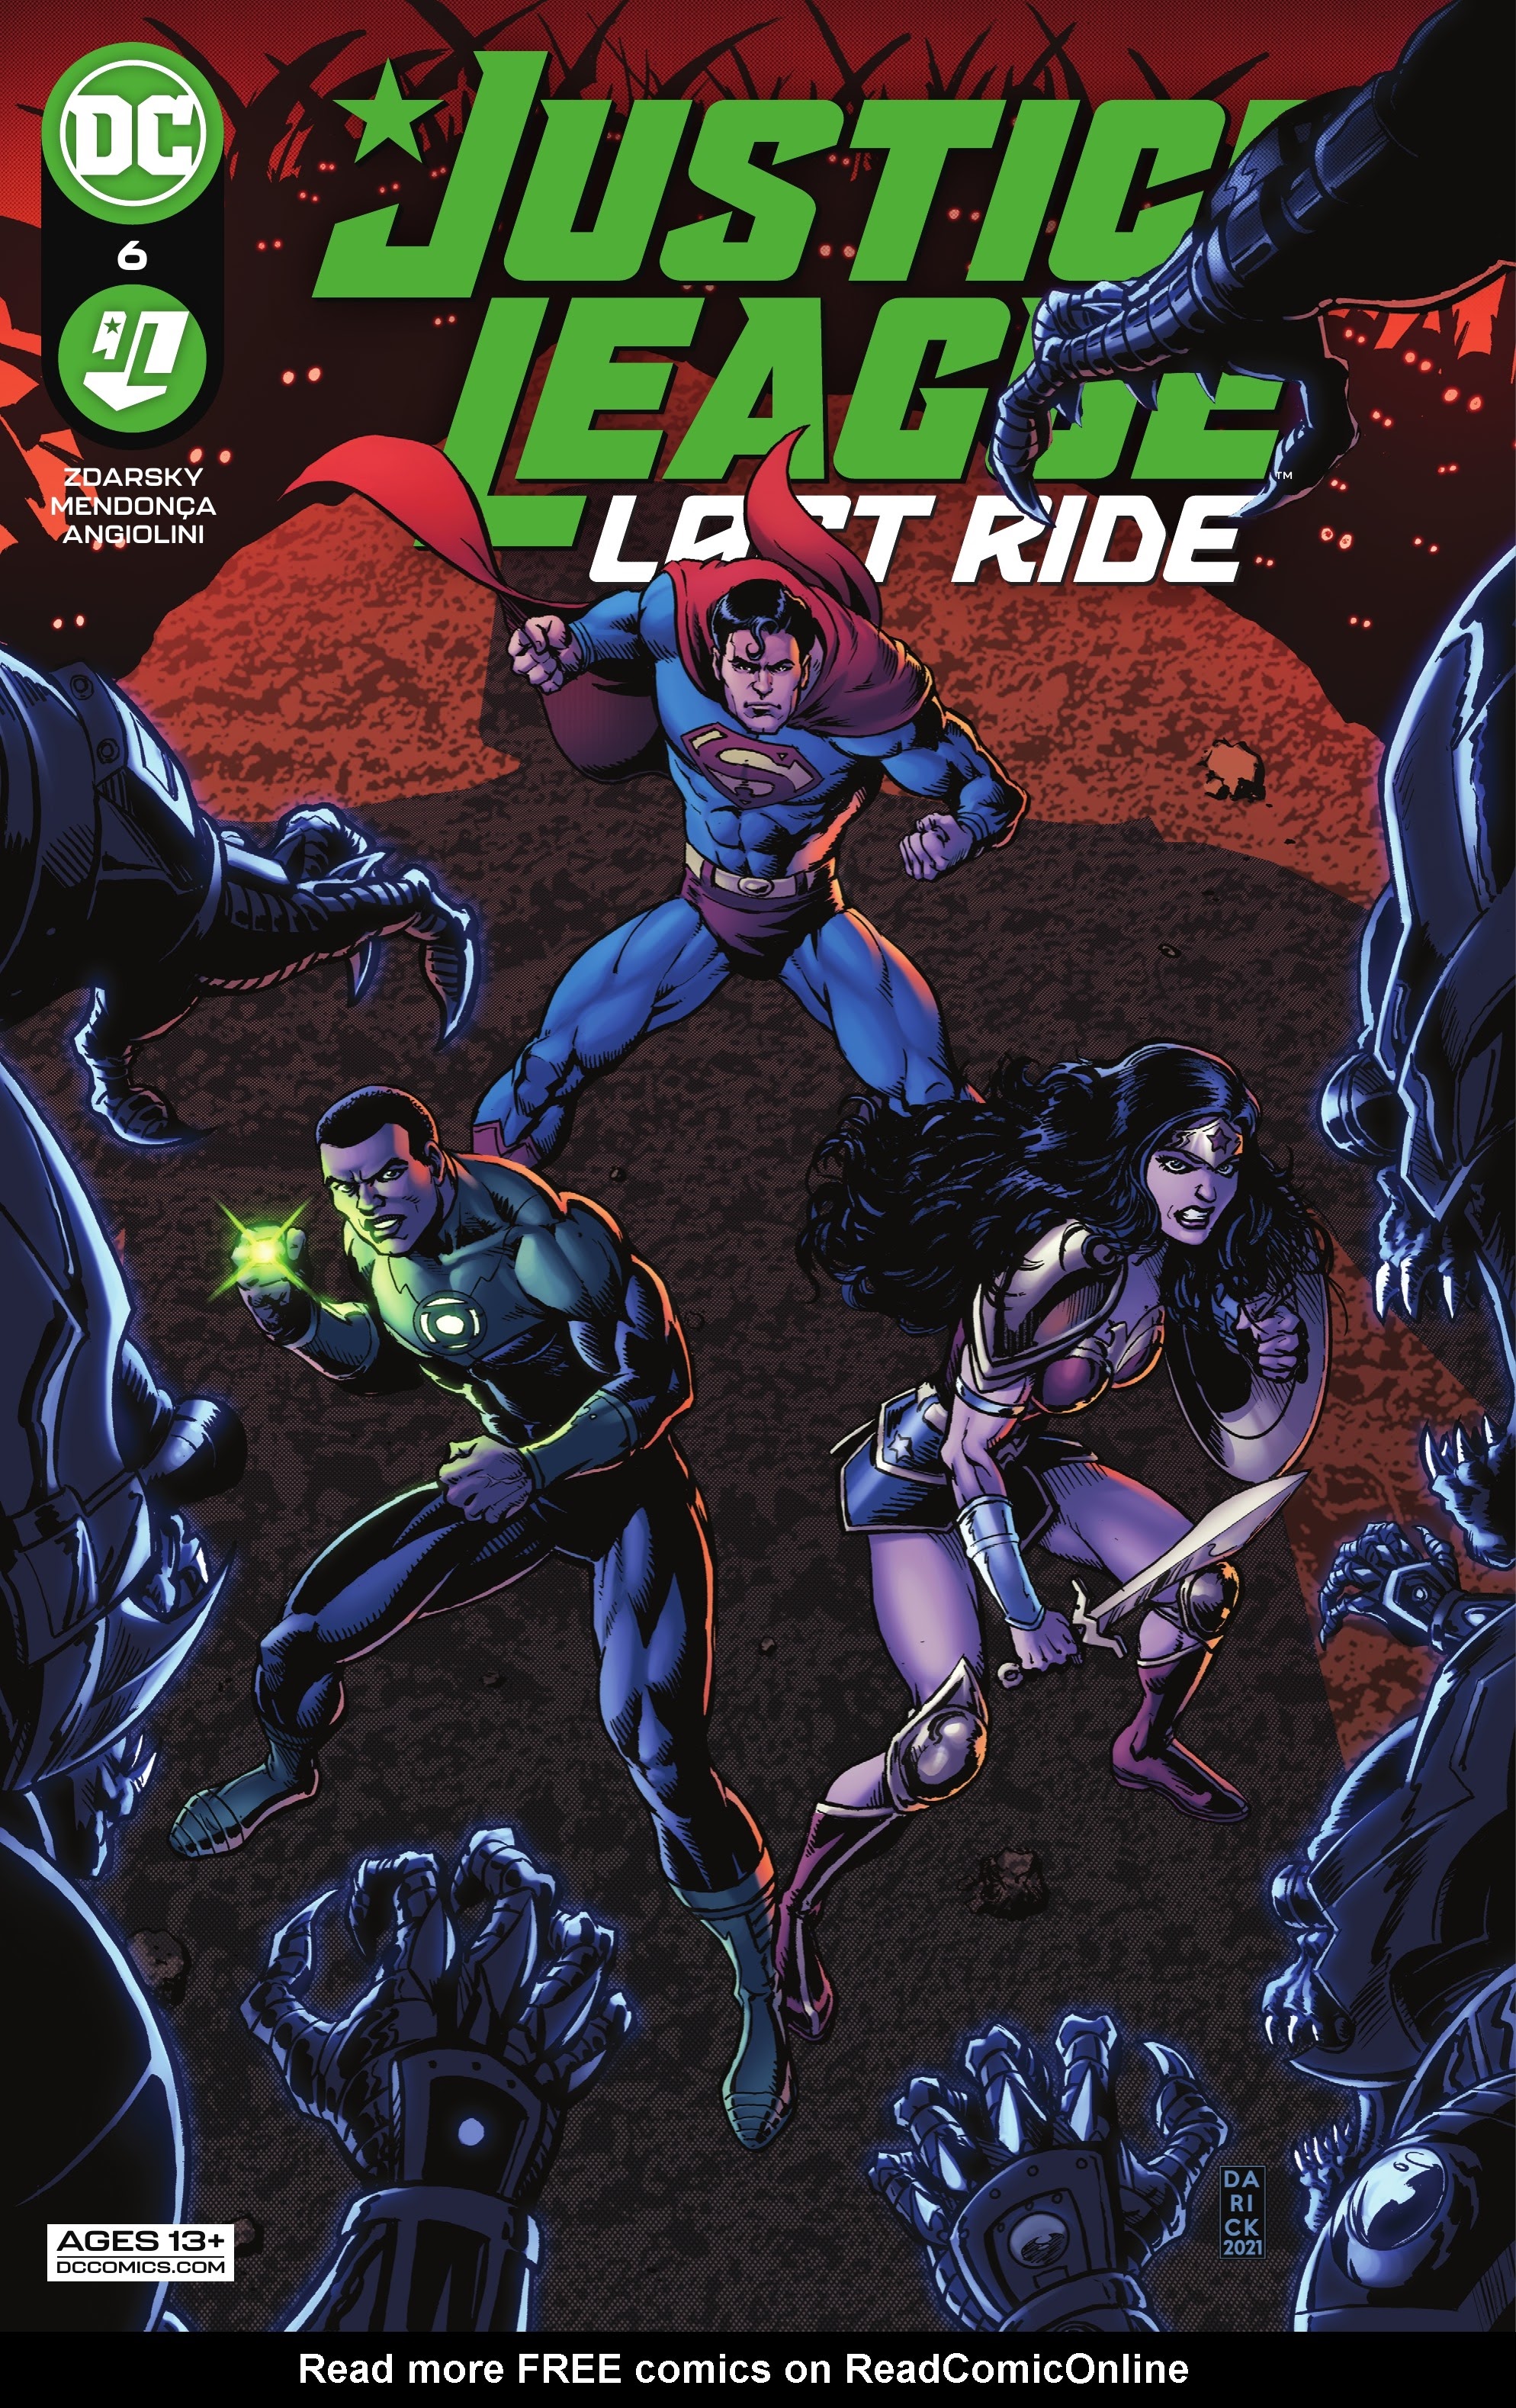 Read online Justice League: Last Ride comic -  Issue #6 - 1